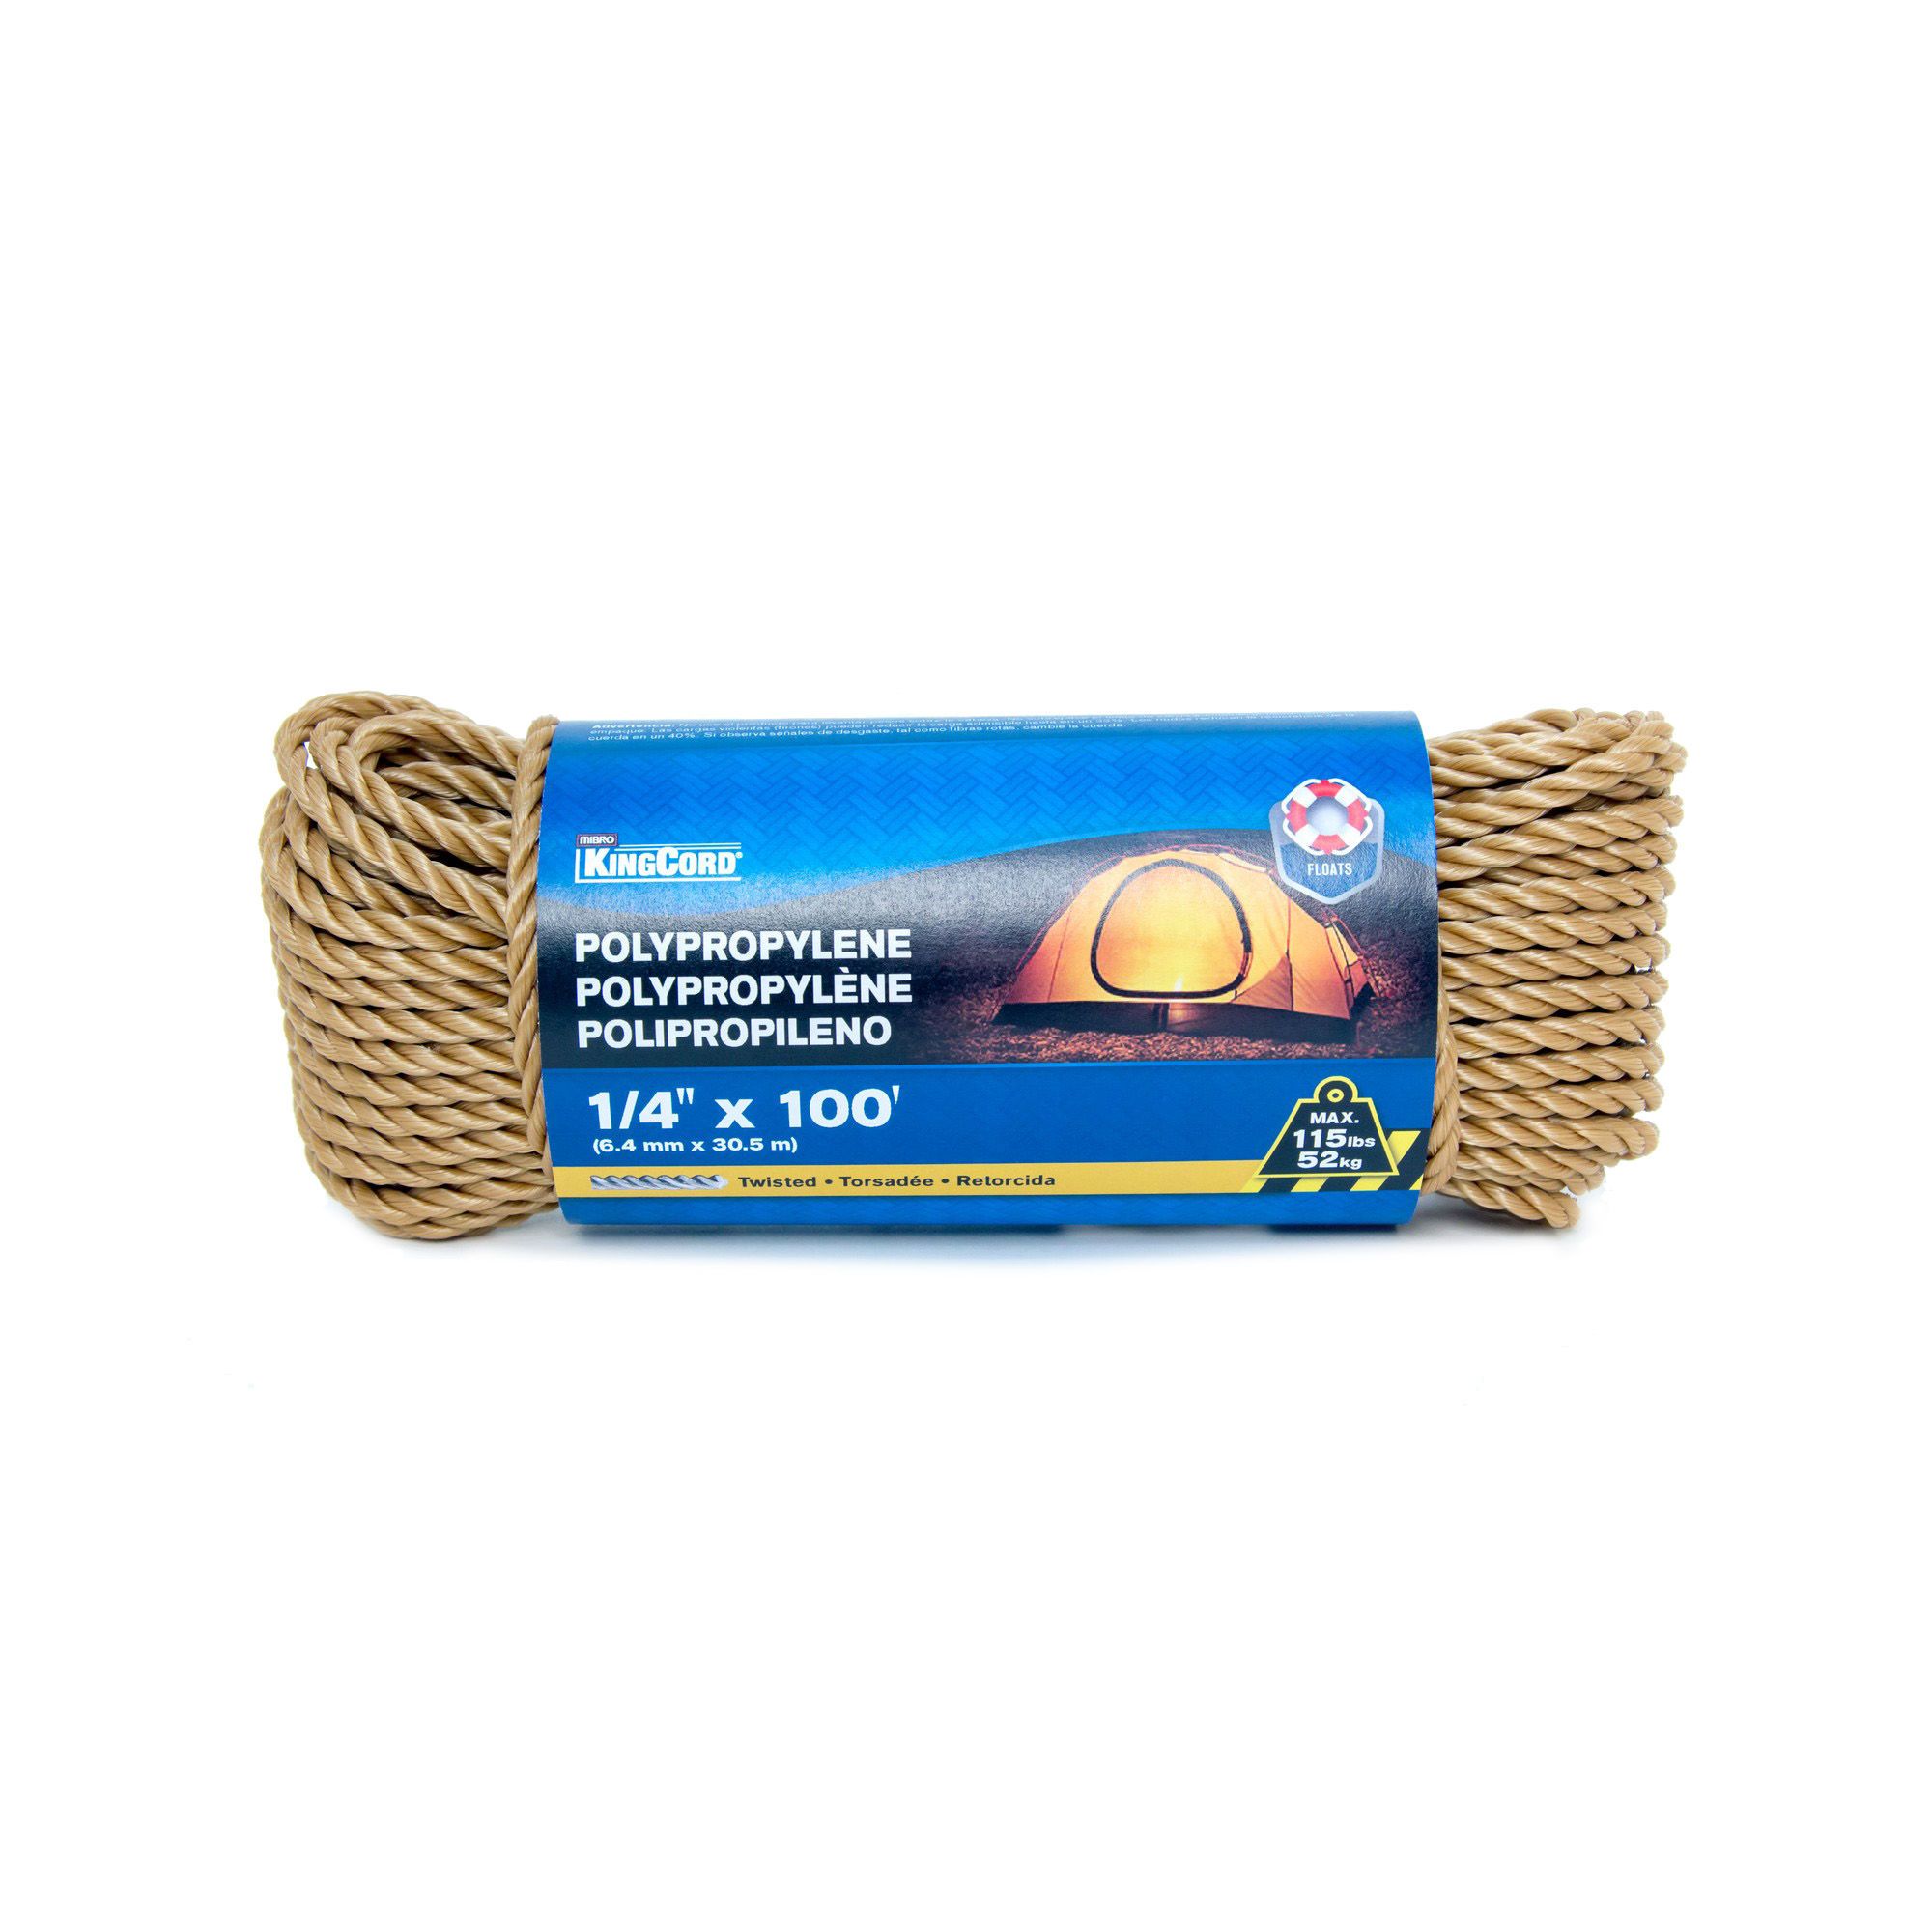 Twisted Polypropylene Rope - Tan - 1/4 x 100' from KINGCORD